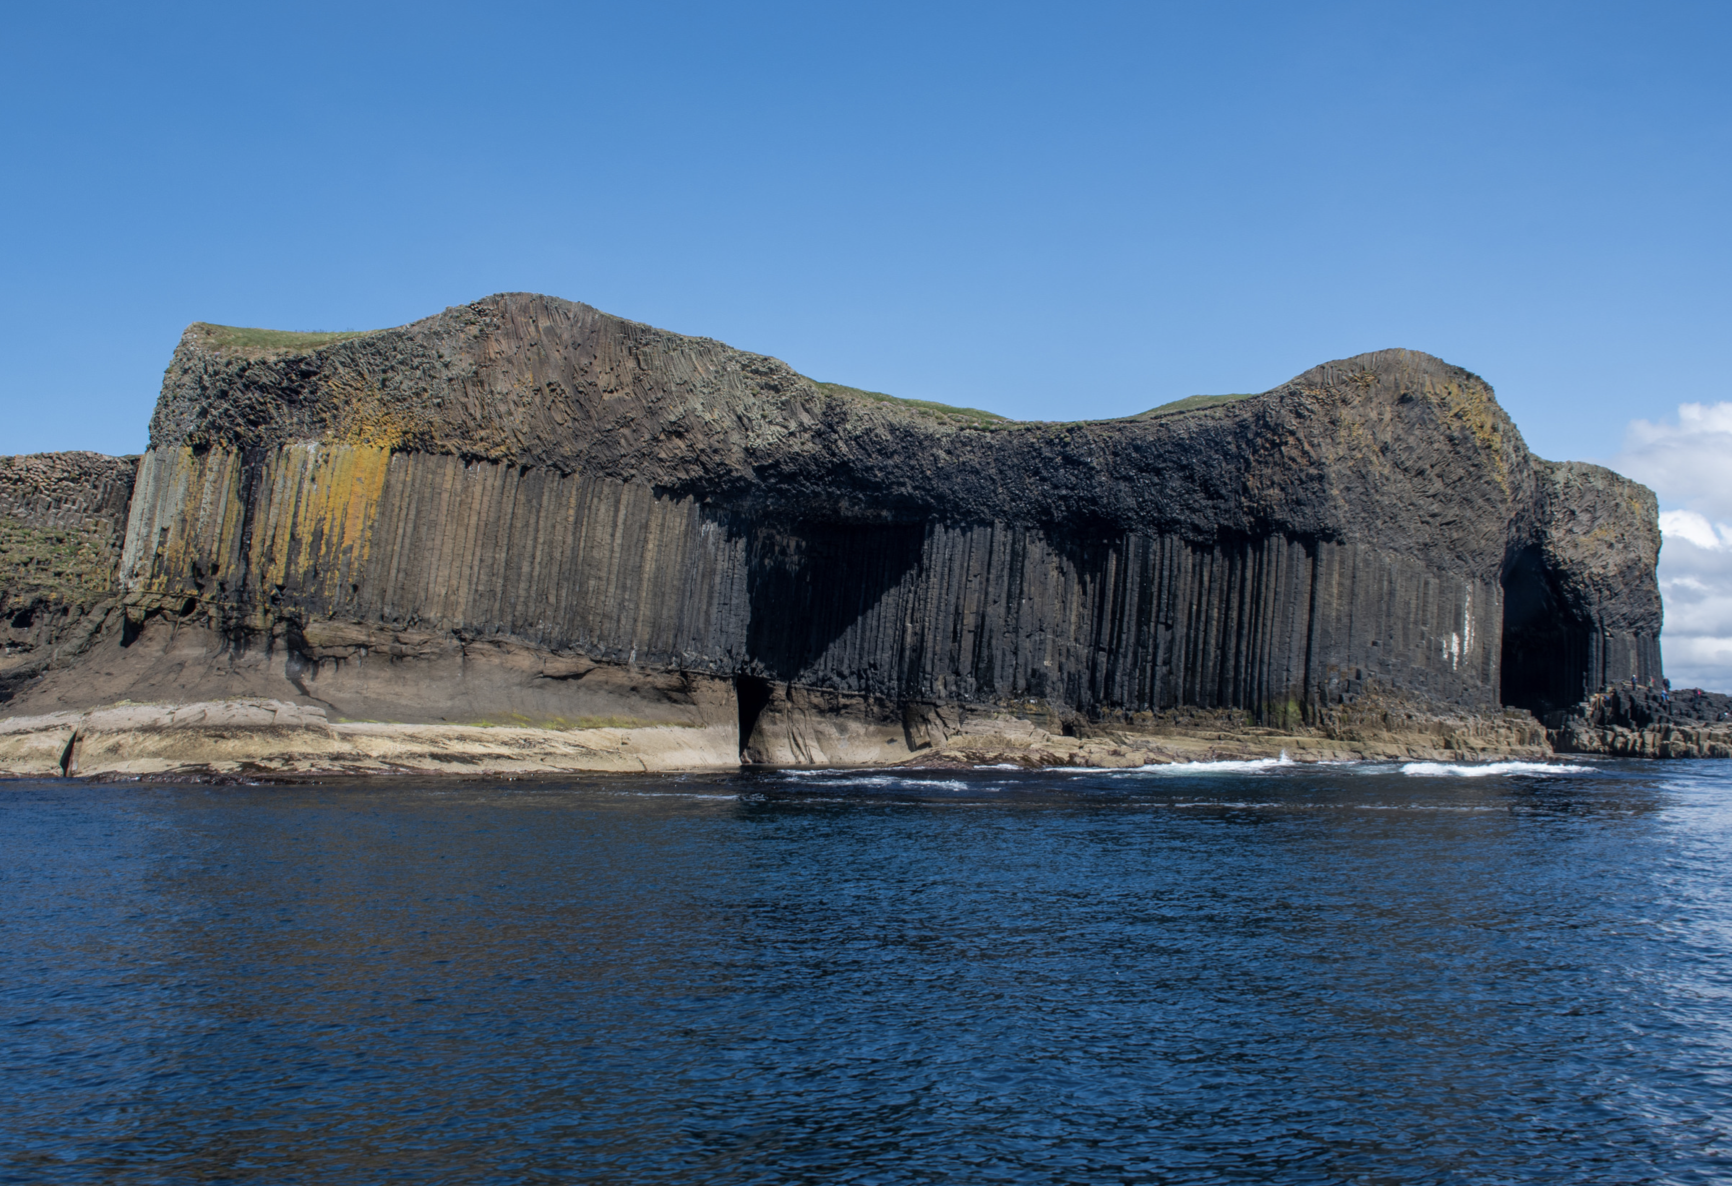 The isle of Staffa and Fingals Cave